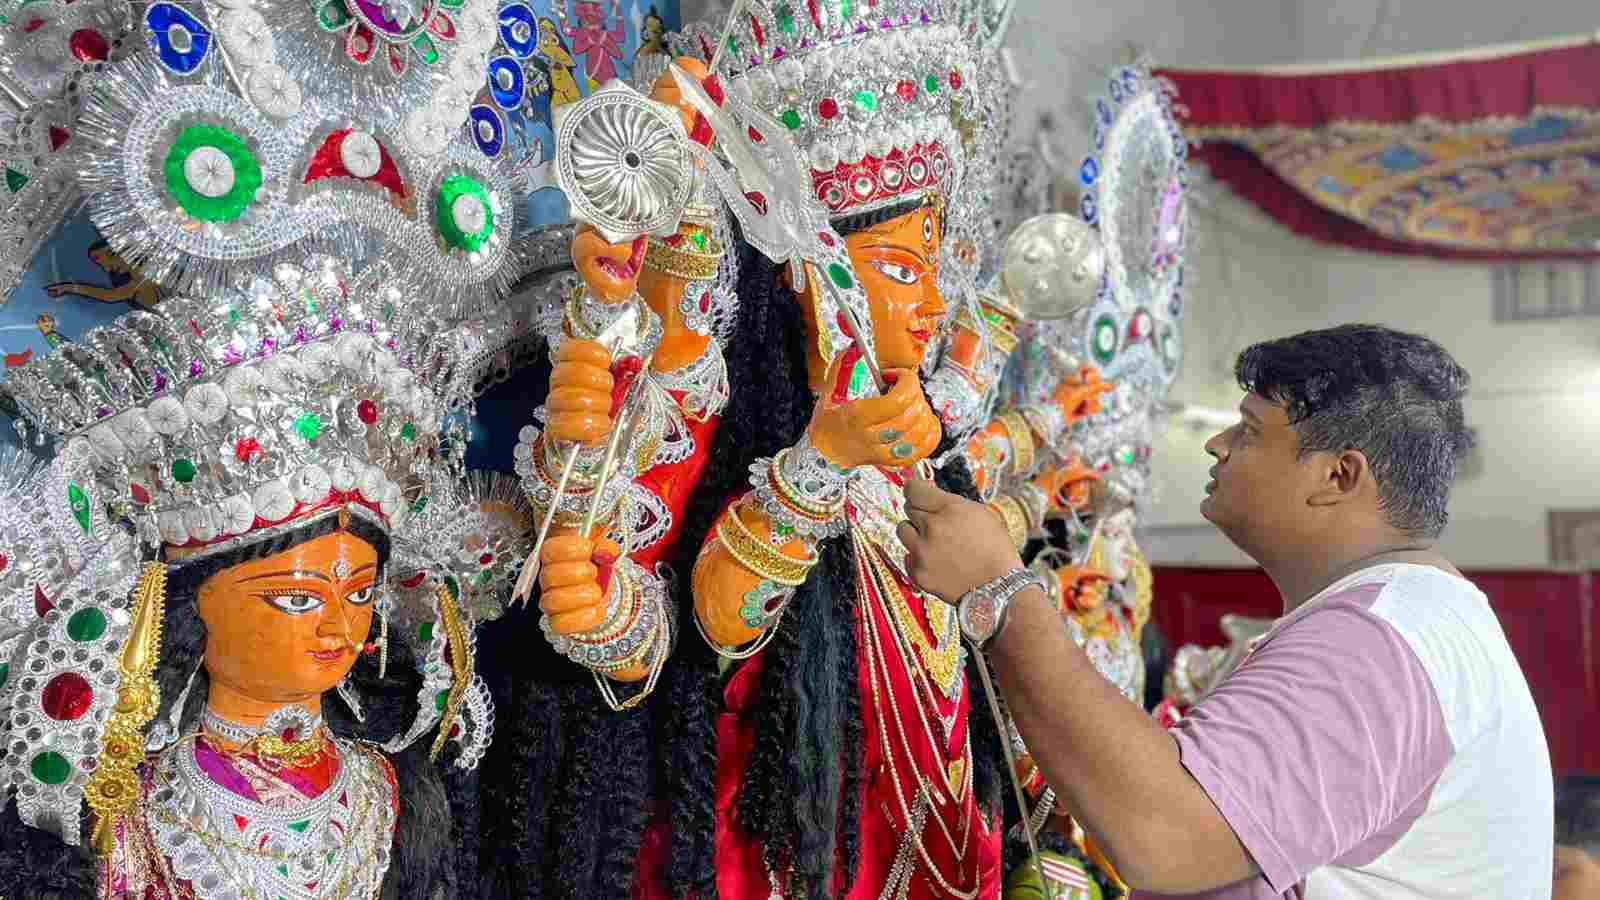 The author helps in decorating Maa Durga with her weapons